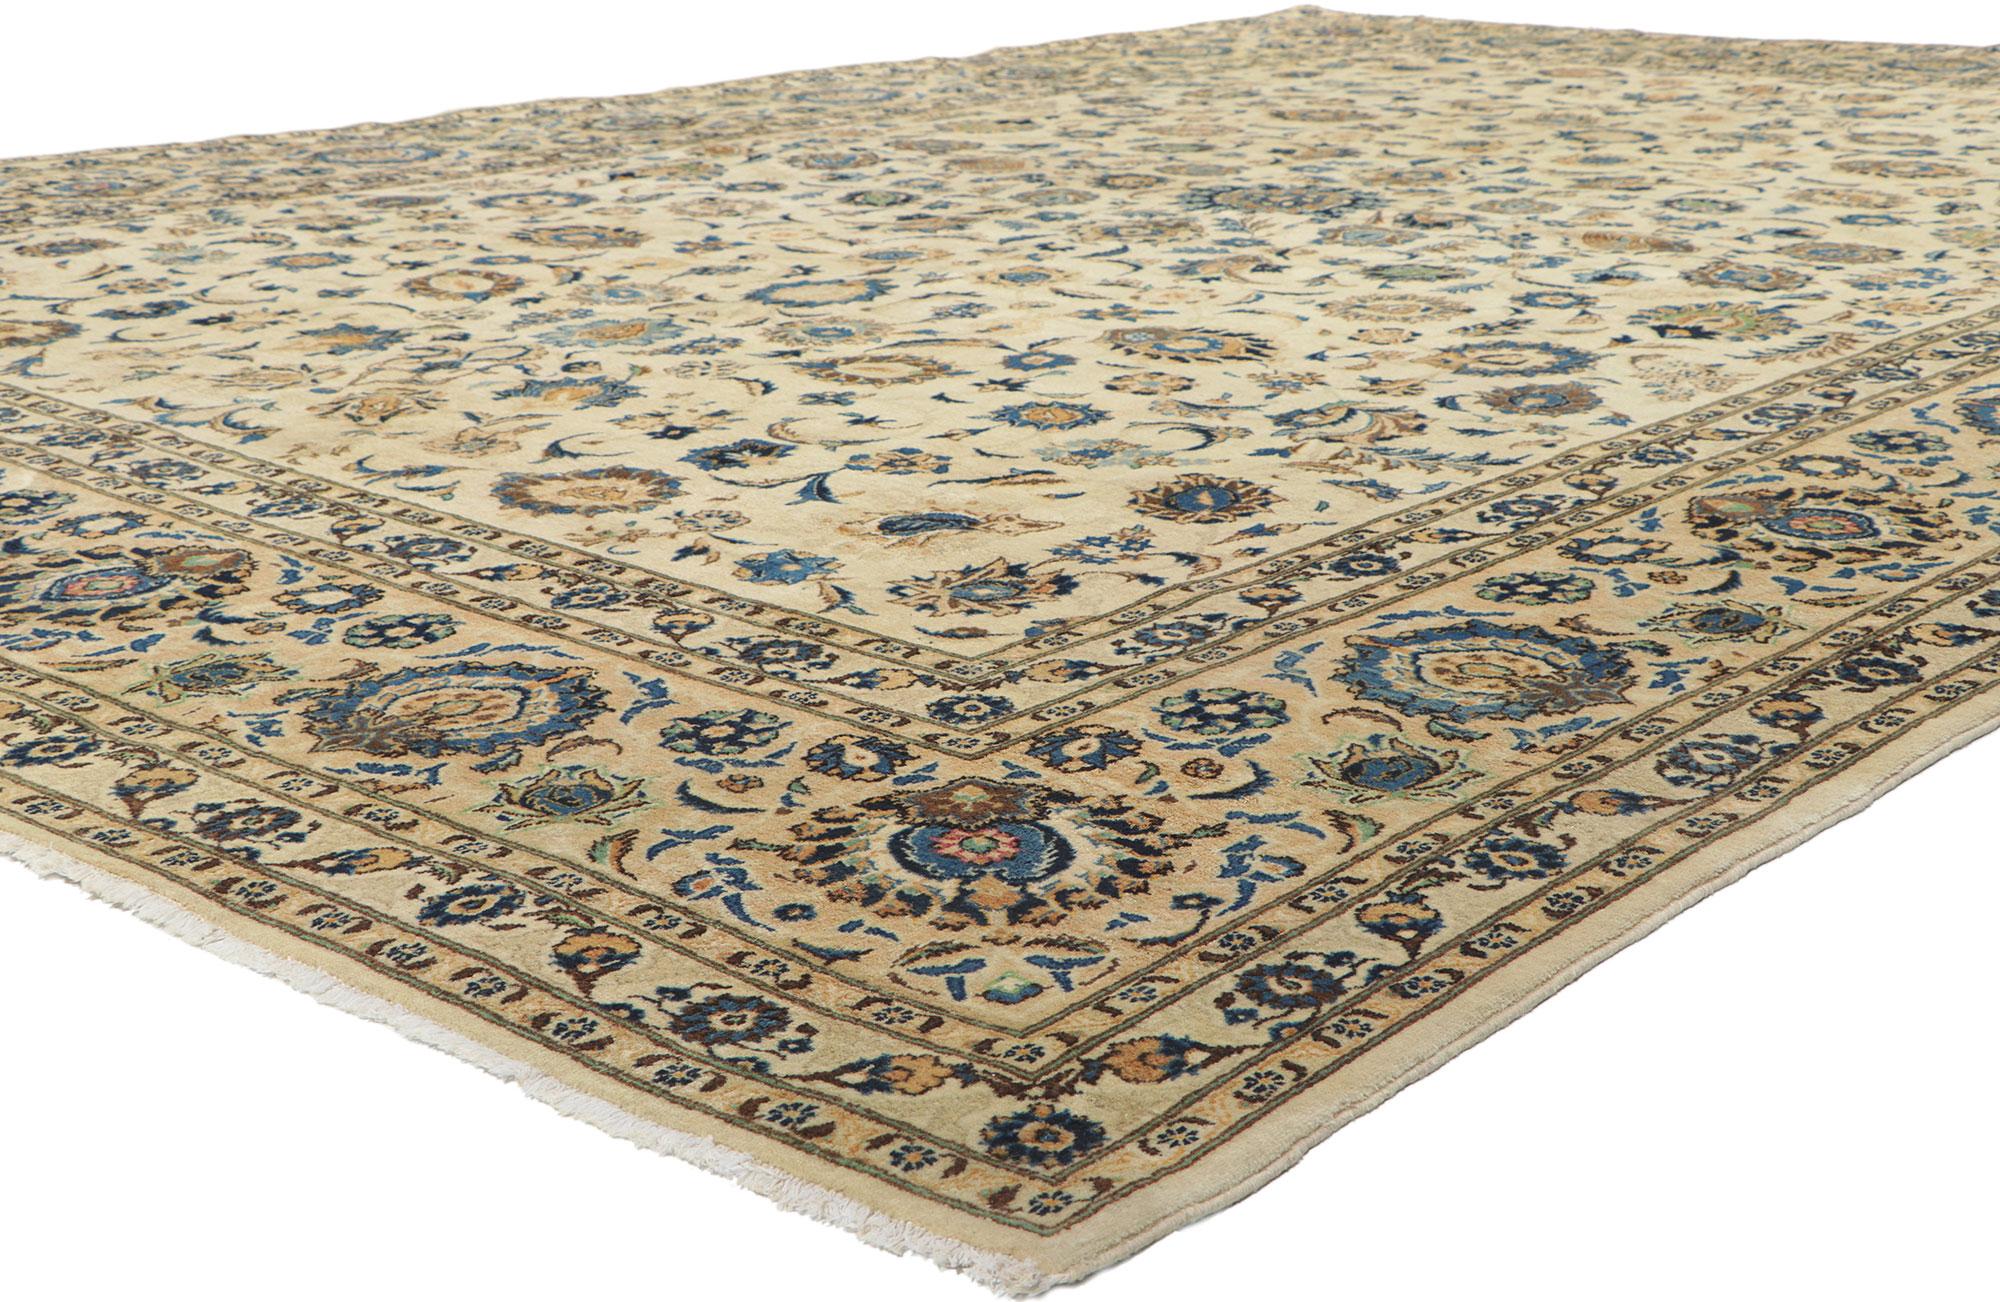 77738 Vintage Persian Nain Rug, 10'04 x 14'11. Emanating timeless style with incredible detail and texture, this hand knotted wool vintage Persian Nain rug is a captivating vision of woven beauty. The ornate botanical design and sophisticated color